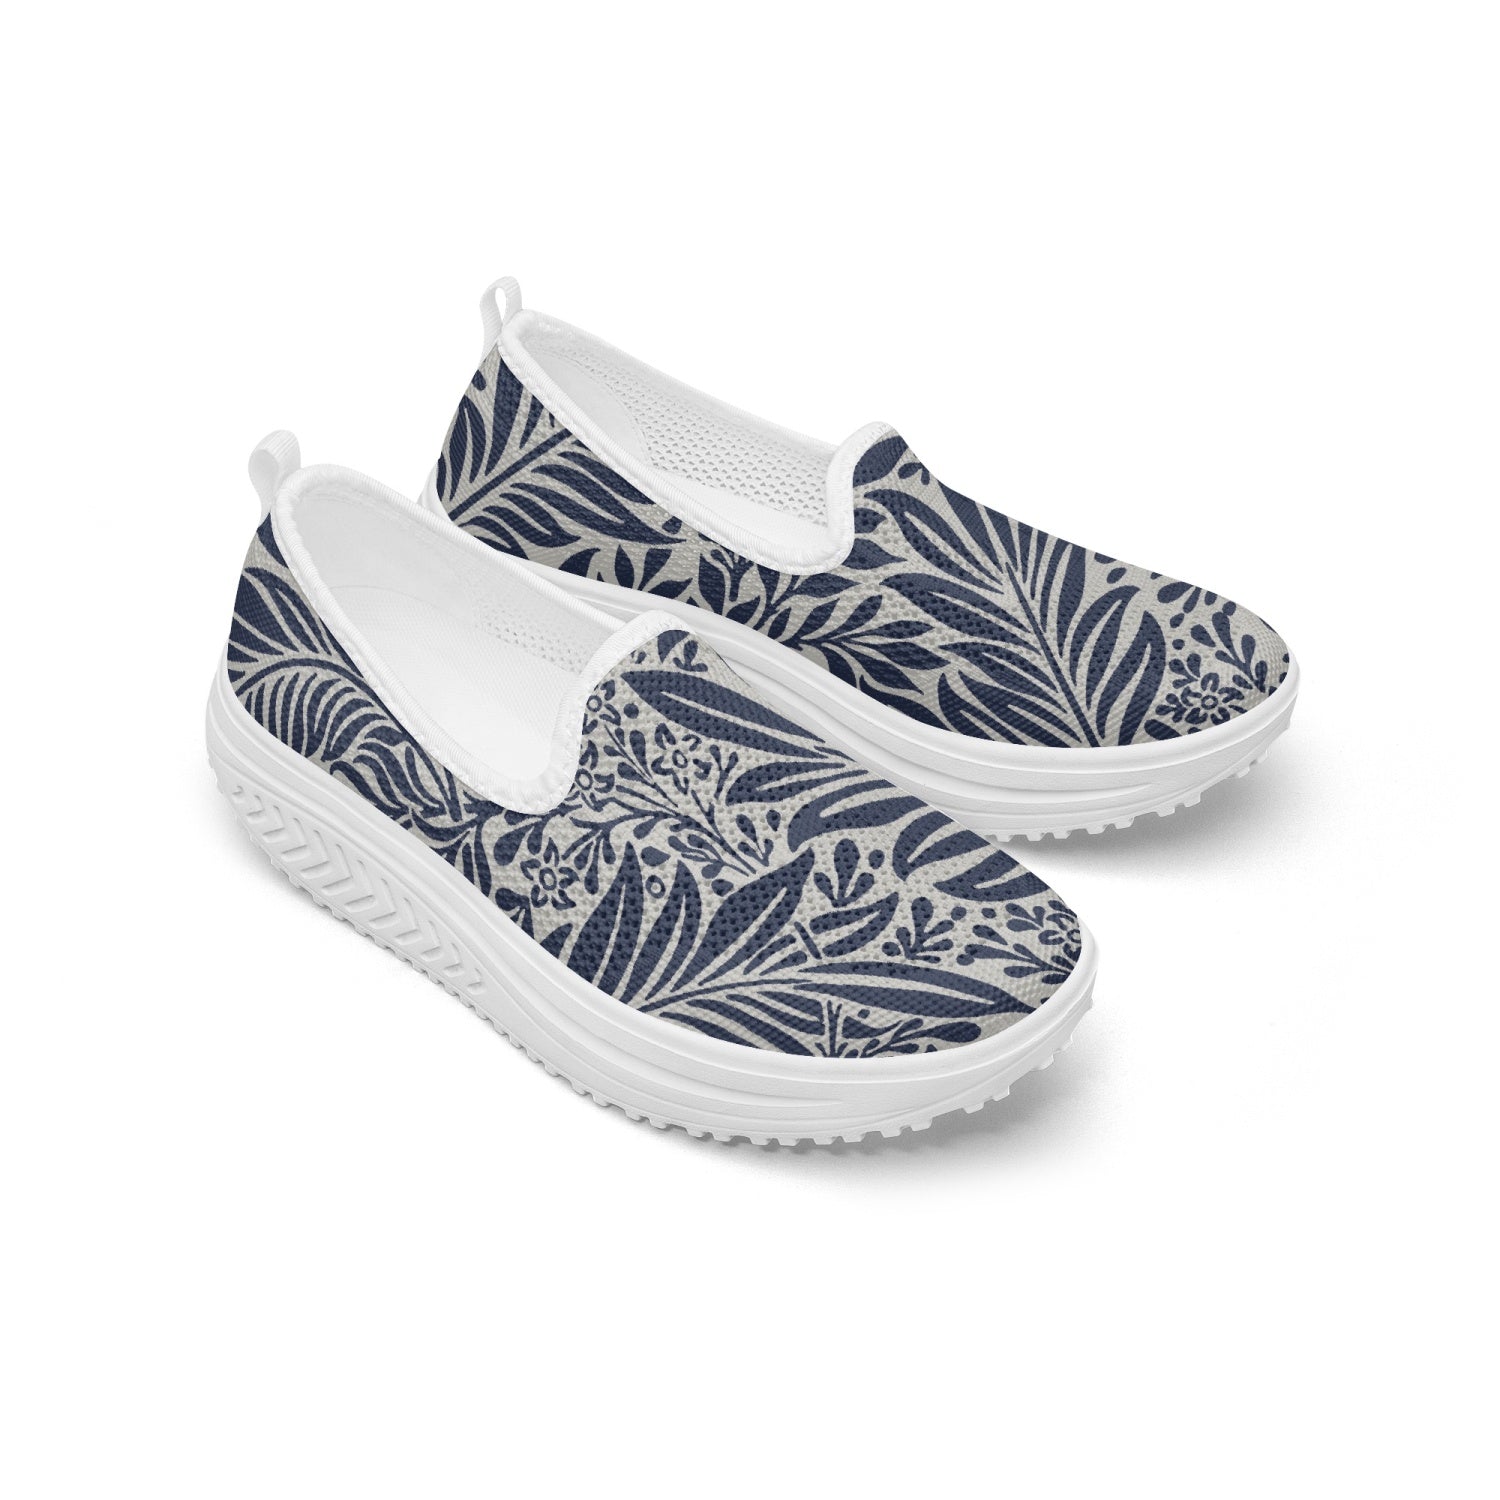 Blue and White Floral pattern Women's Slip-On Mesh Rocking Shoes, by Sensus Studio Design